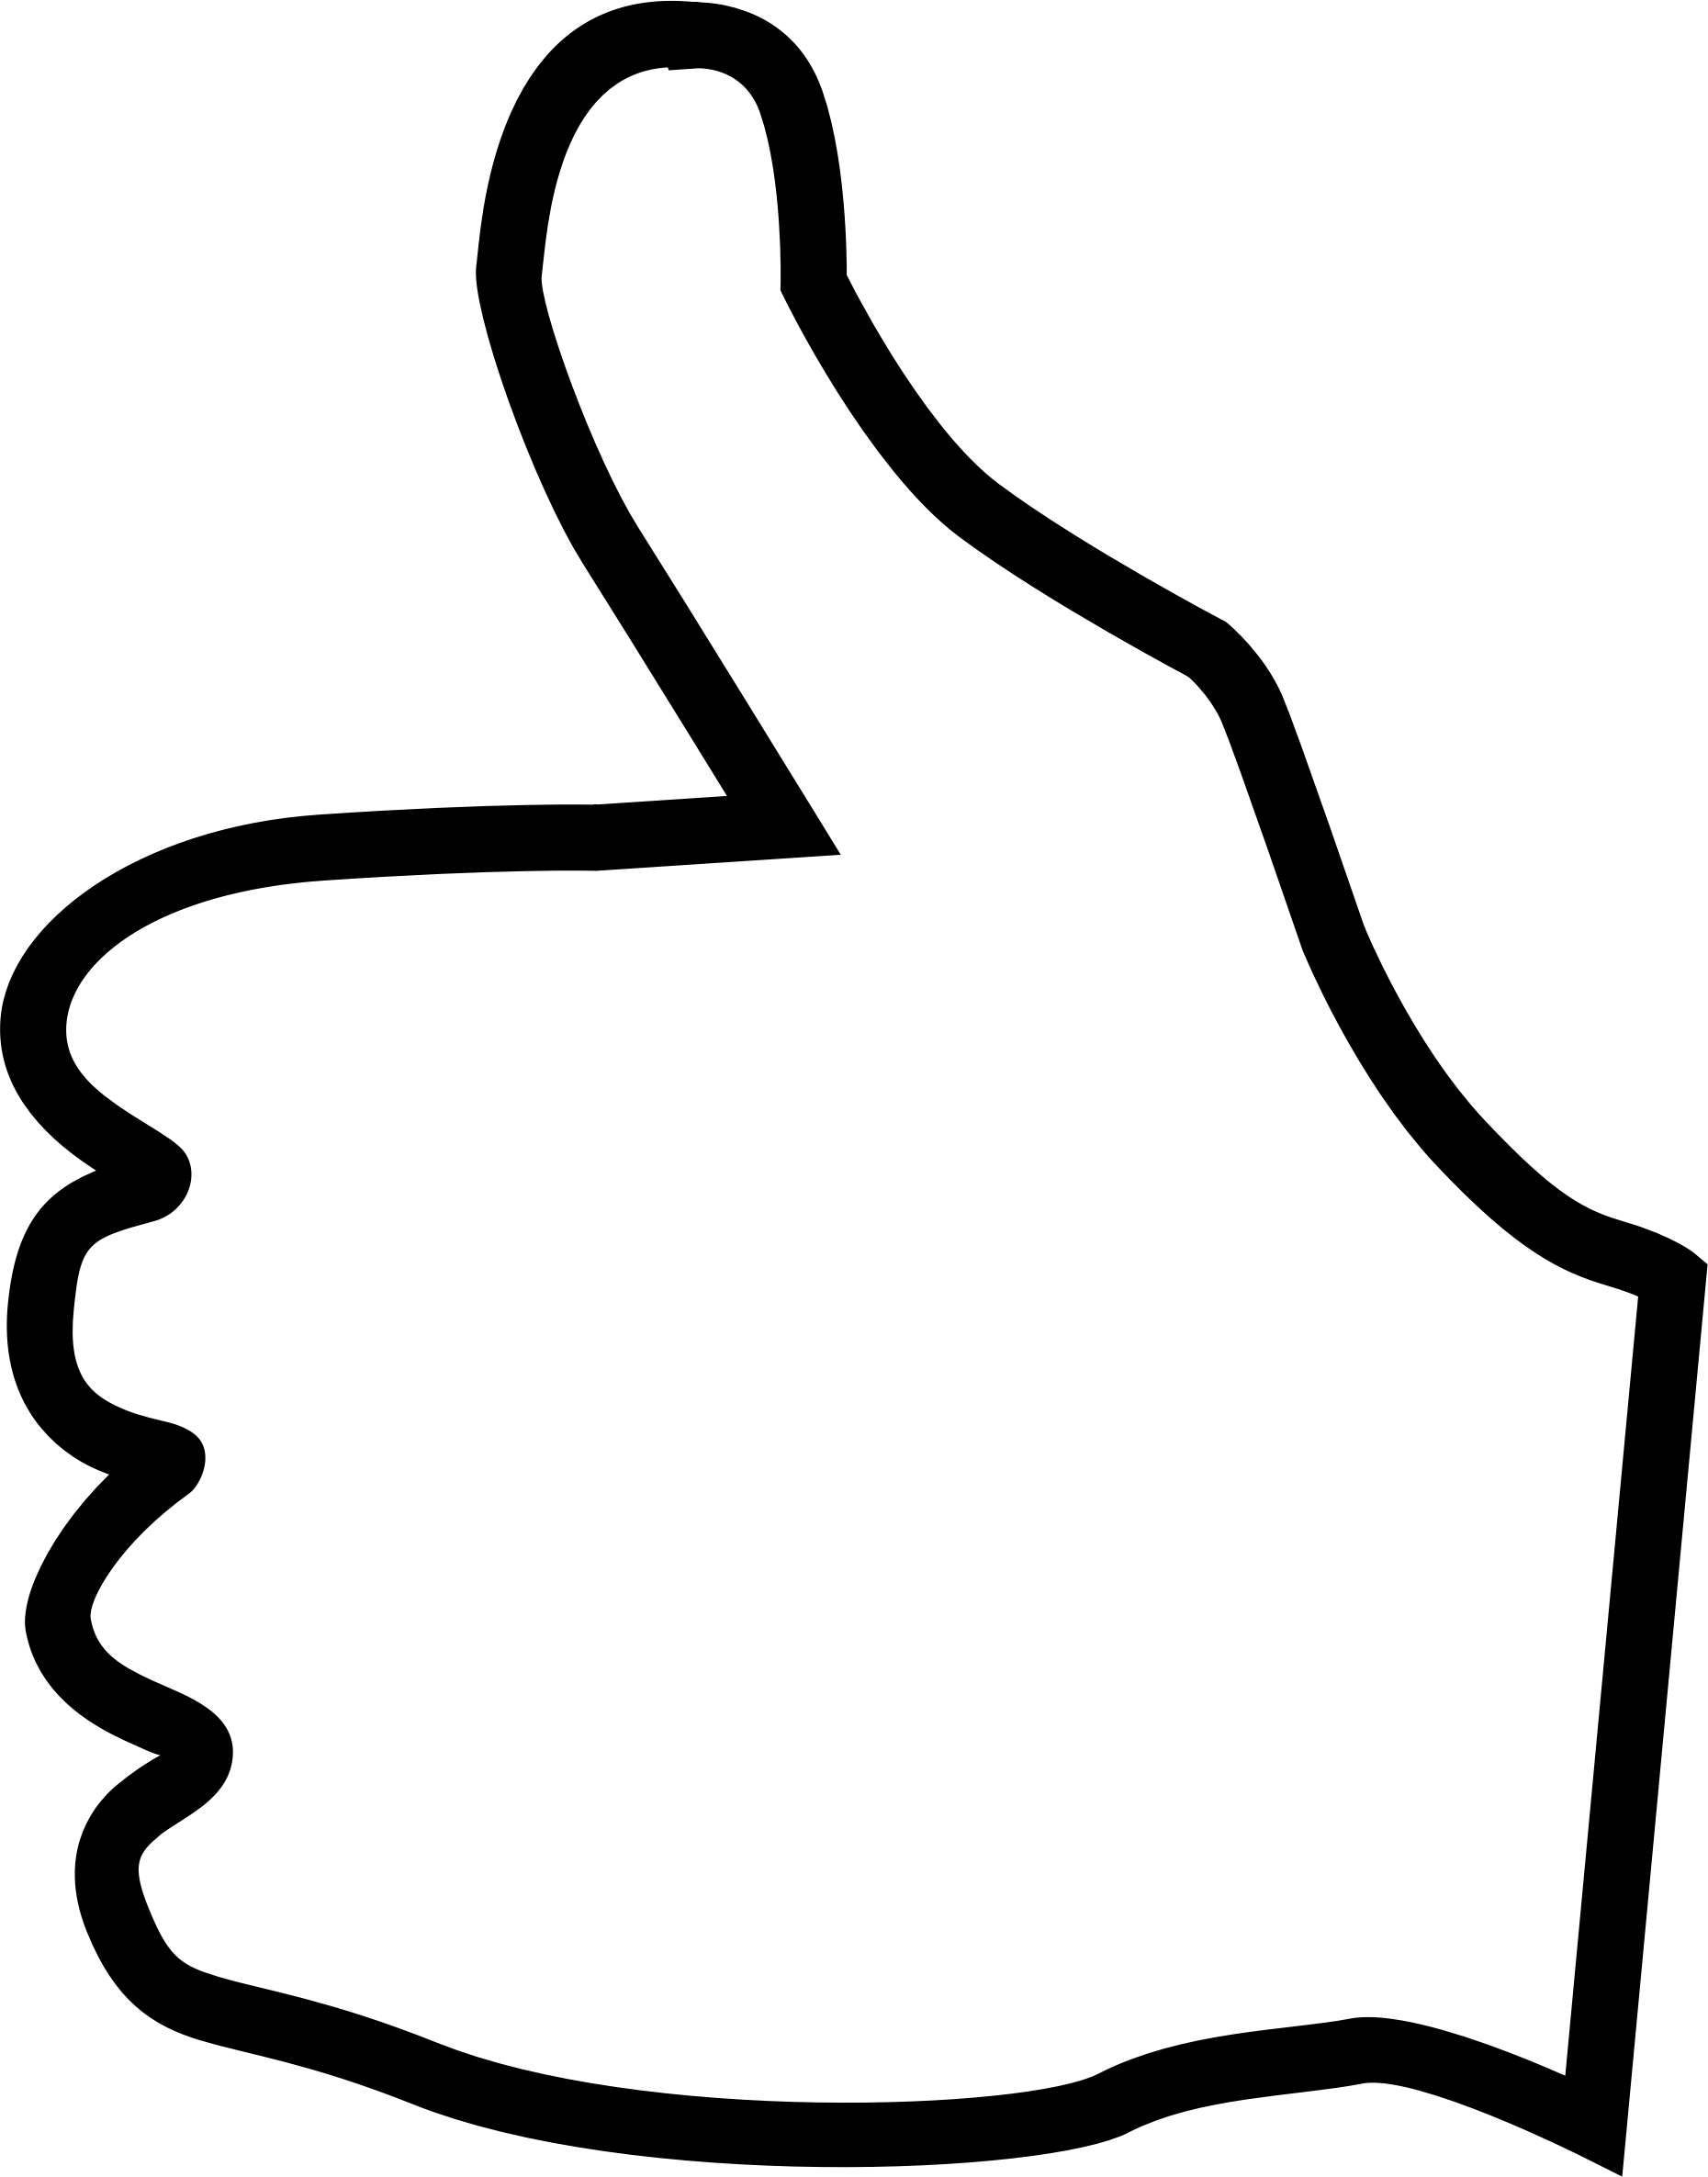 free clipart images thumbs up - photo #26